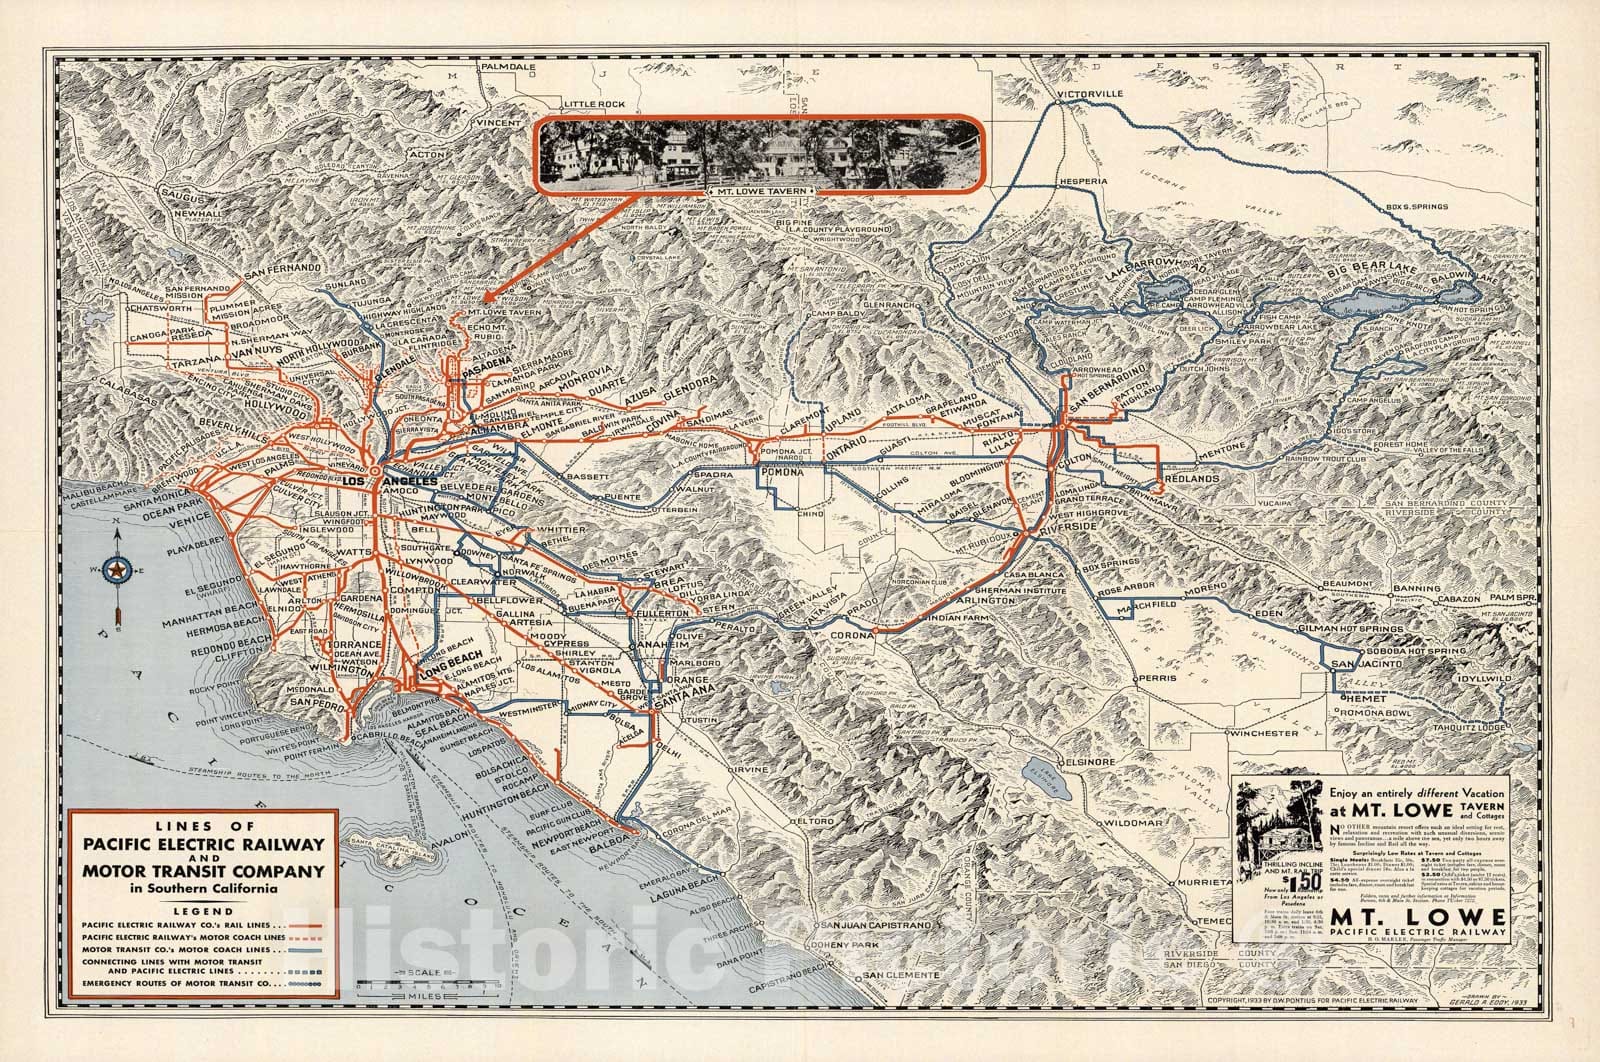 Historic Map - Lines of Pacific Electric Railway and Motor Transit Company in Southern California (with View of Mt. Lowe Tavern), 1935 - Vintage Wall Art